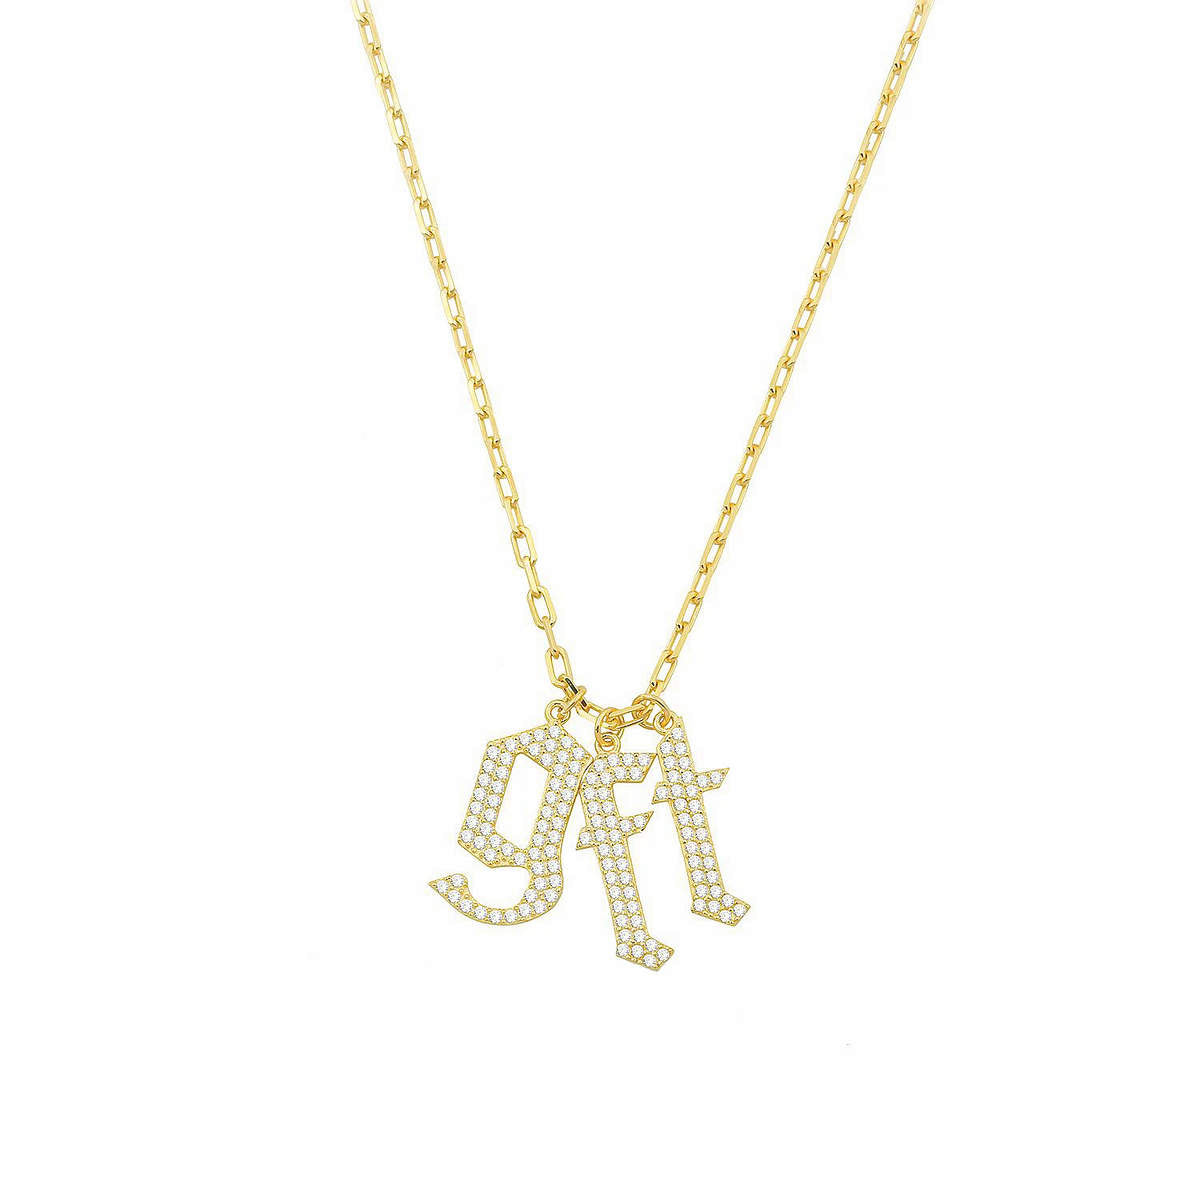 The Rockstar Pavé Letters Necklace in Clear